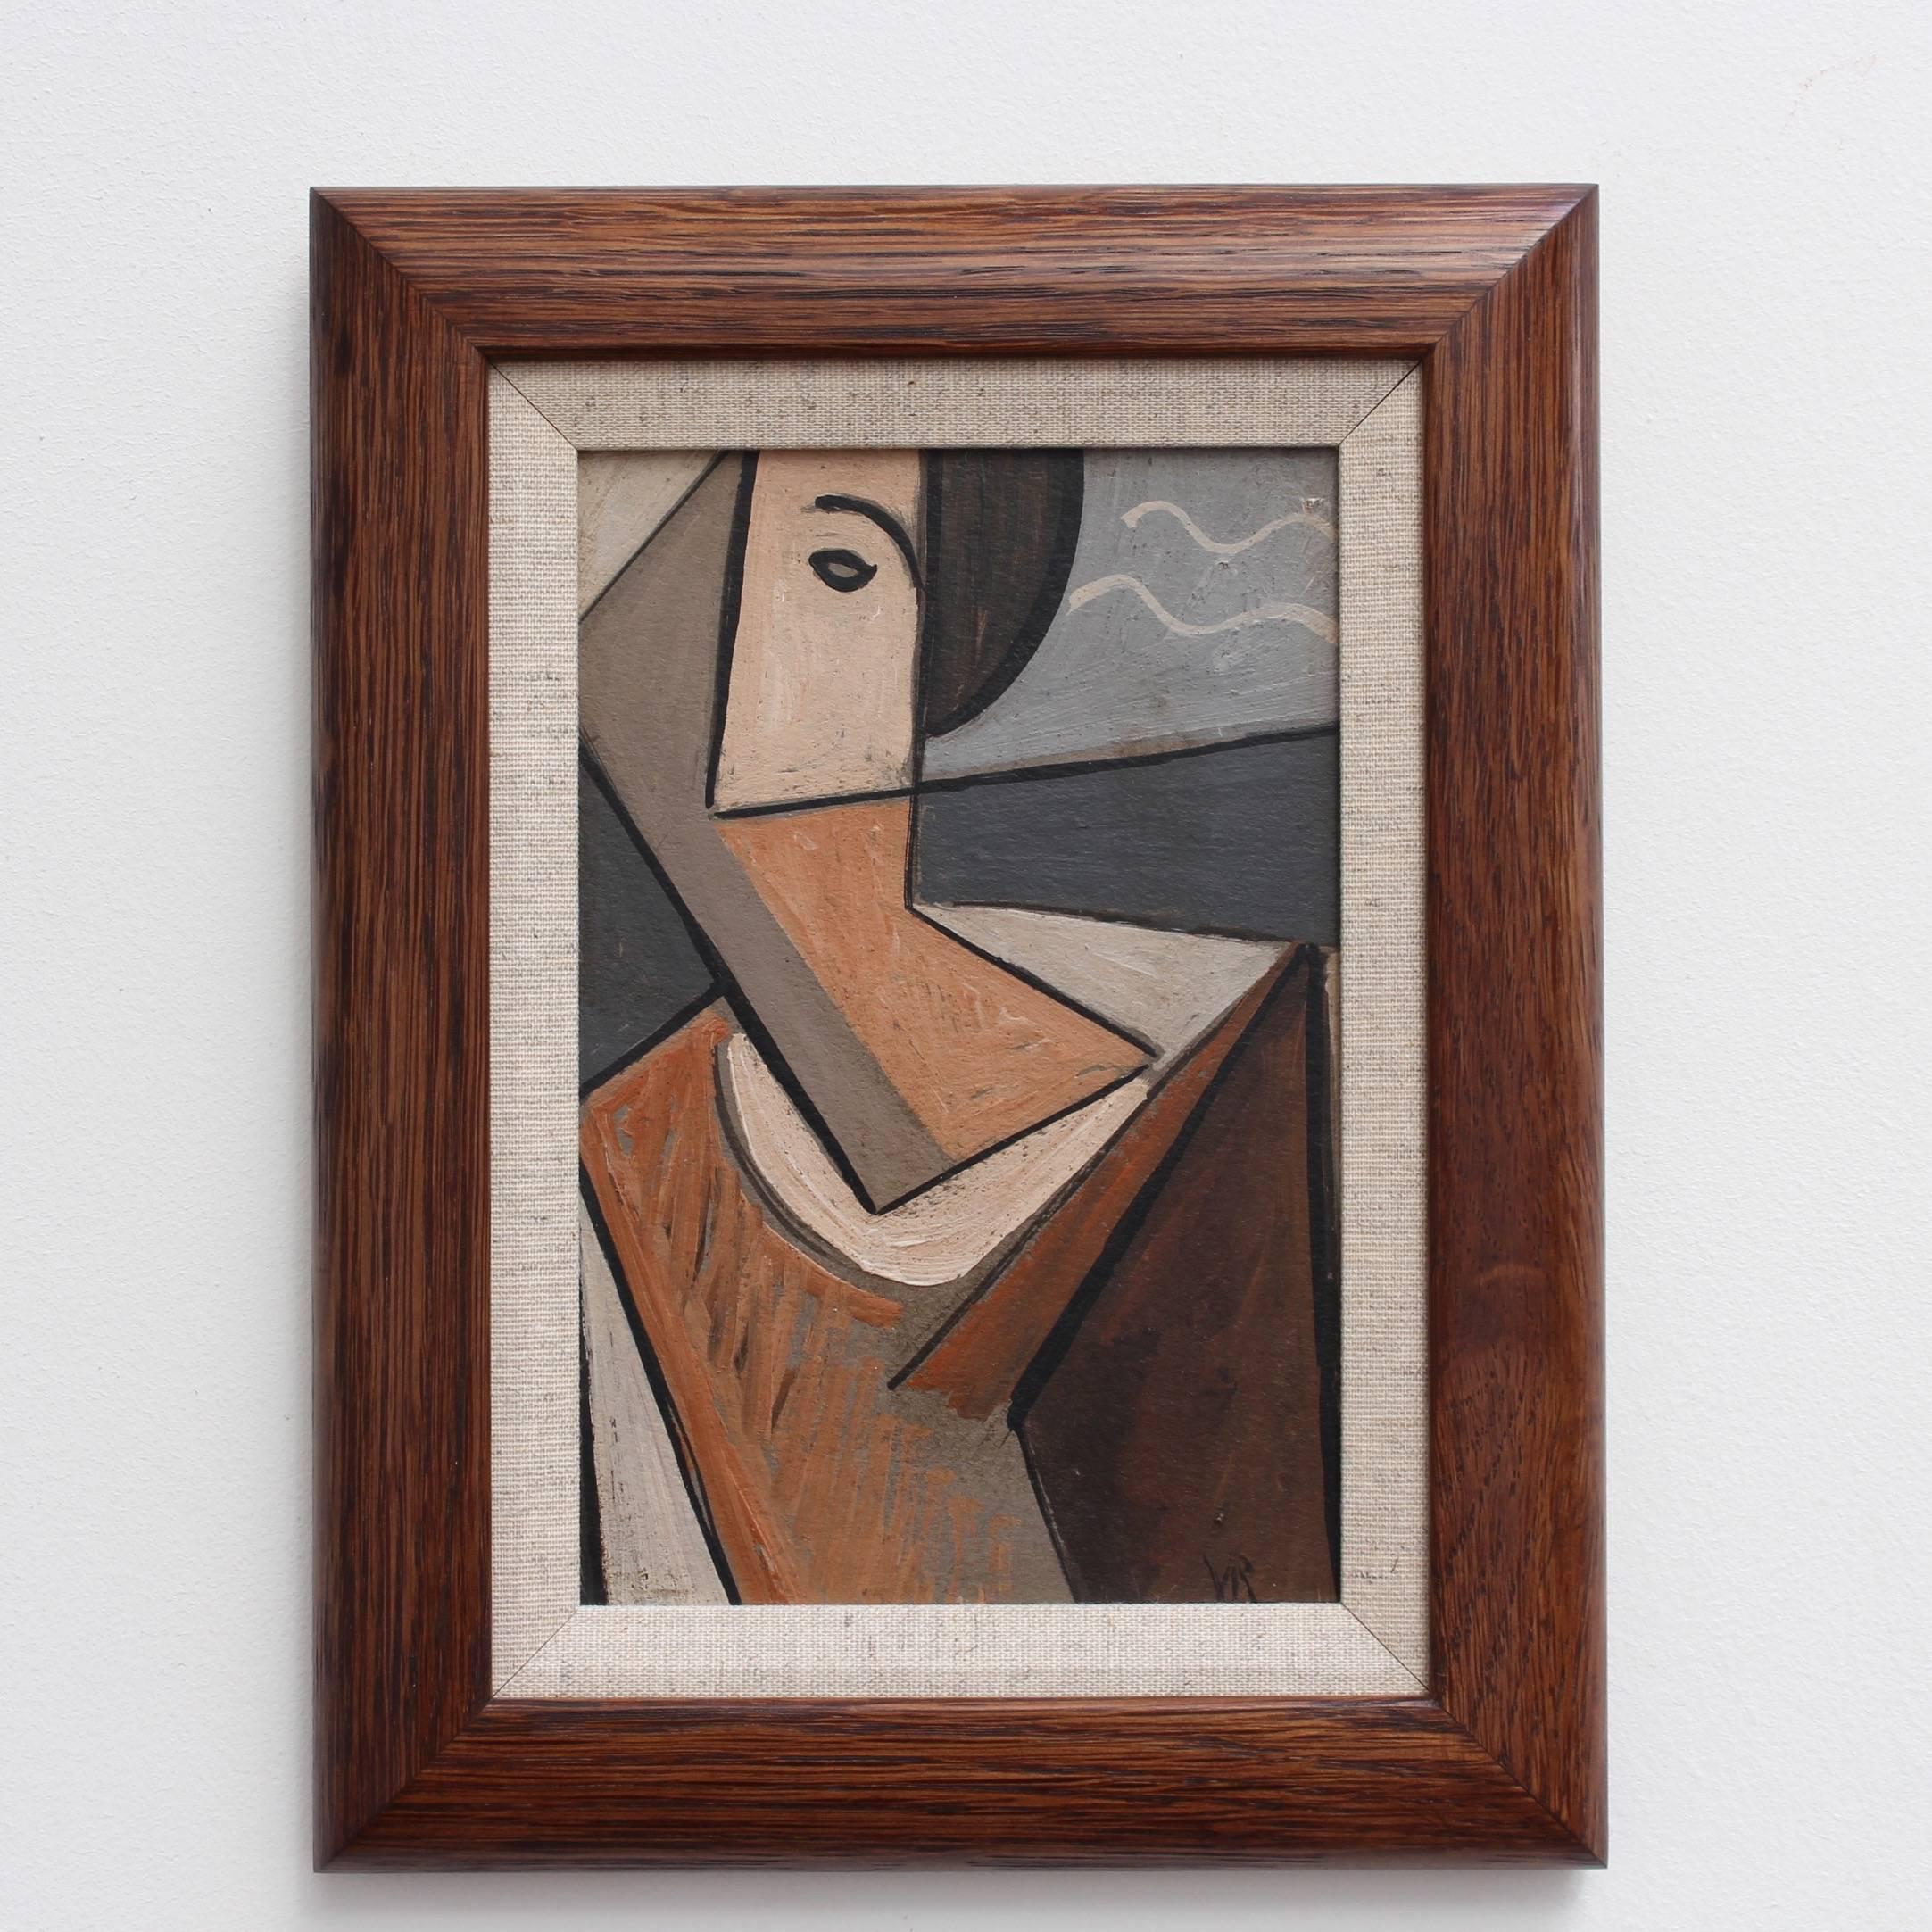 'Portrait of a Young Man', oil on board, by V.R. (Circa 1940s -1960s). A cubist depiction of a handsome young man by the sea. From the 'School of Berlin', this piece is most certainly inspired by Picasso and the cubists from the pre and post-war